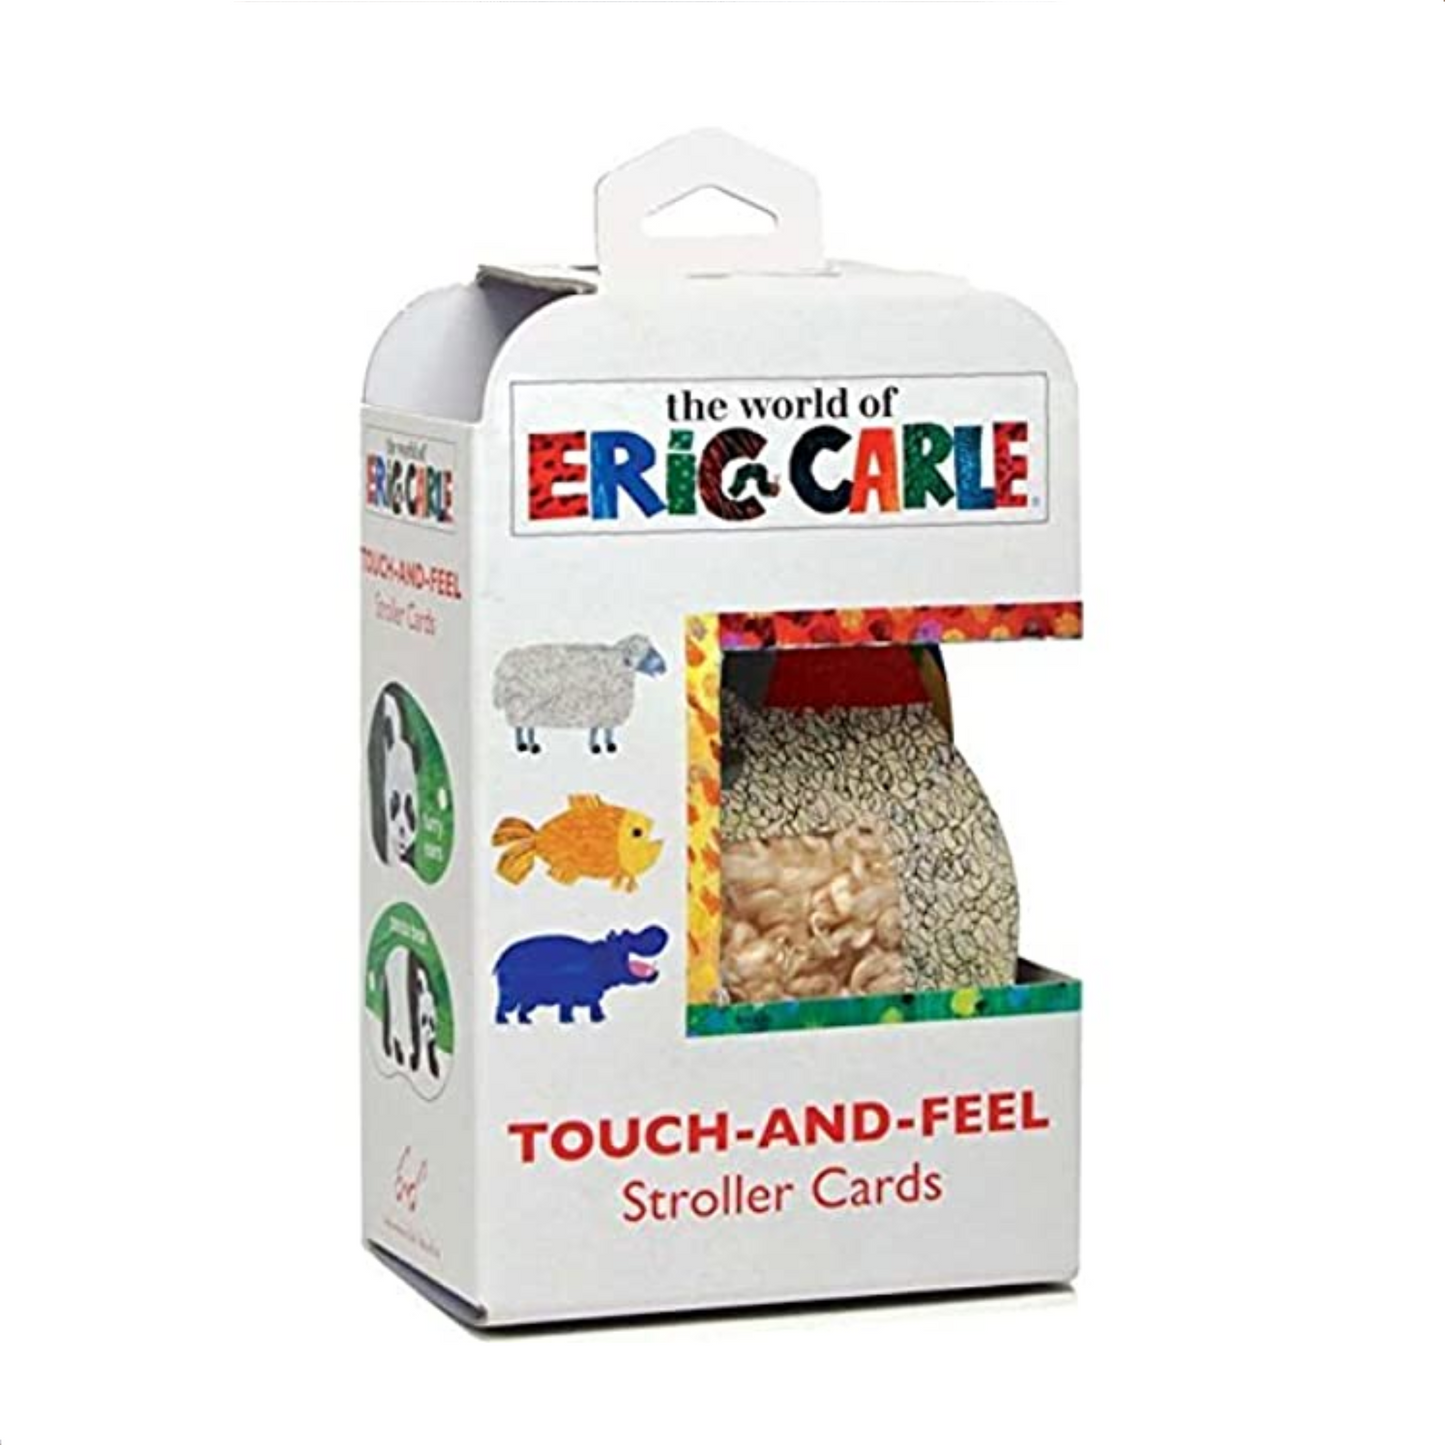 The World of Eric Carle Touch & Feel Stroller Cards